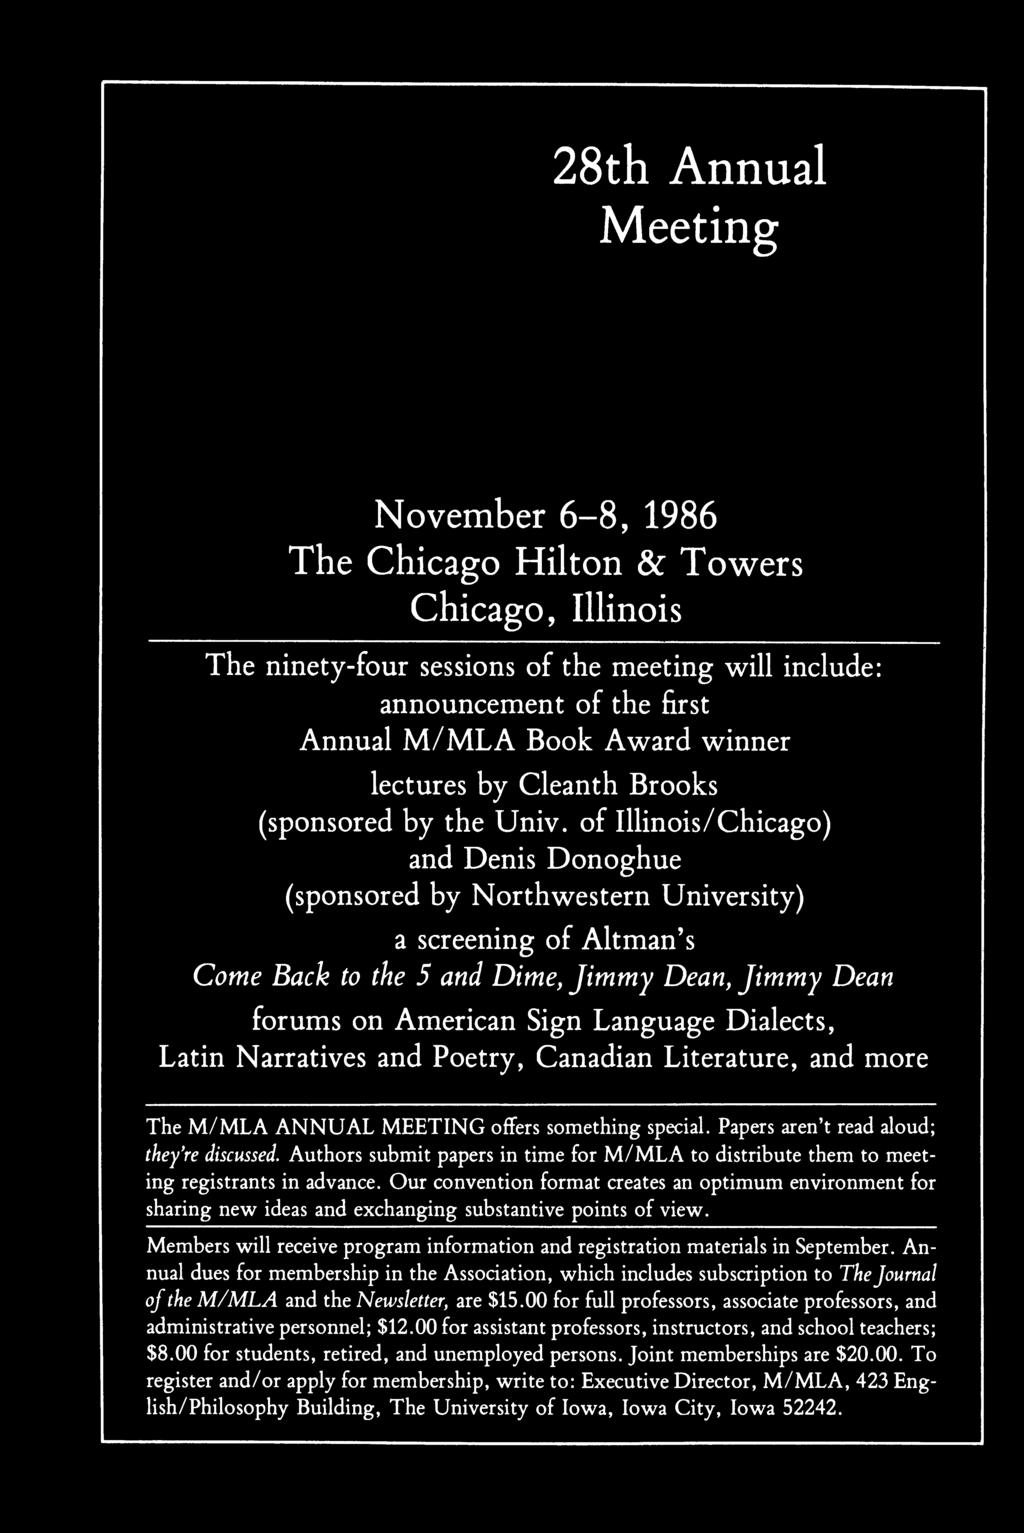 of Illinois/Chicago) and Denis Donoghue (sponsored by Northwestern University) a screening of Altman s Come Back to the 5 and Dime, Jimmy Dean, Jimmy Dean forums on American